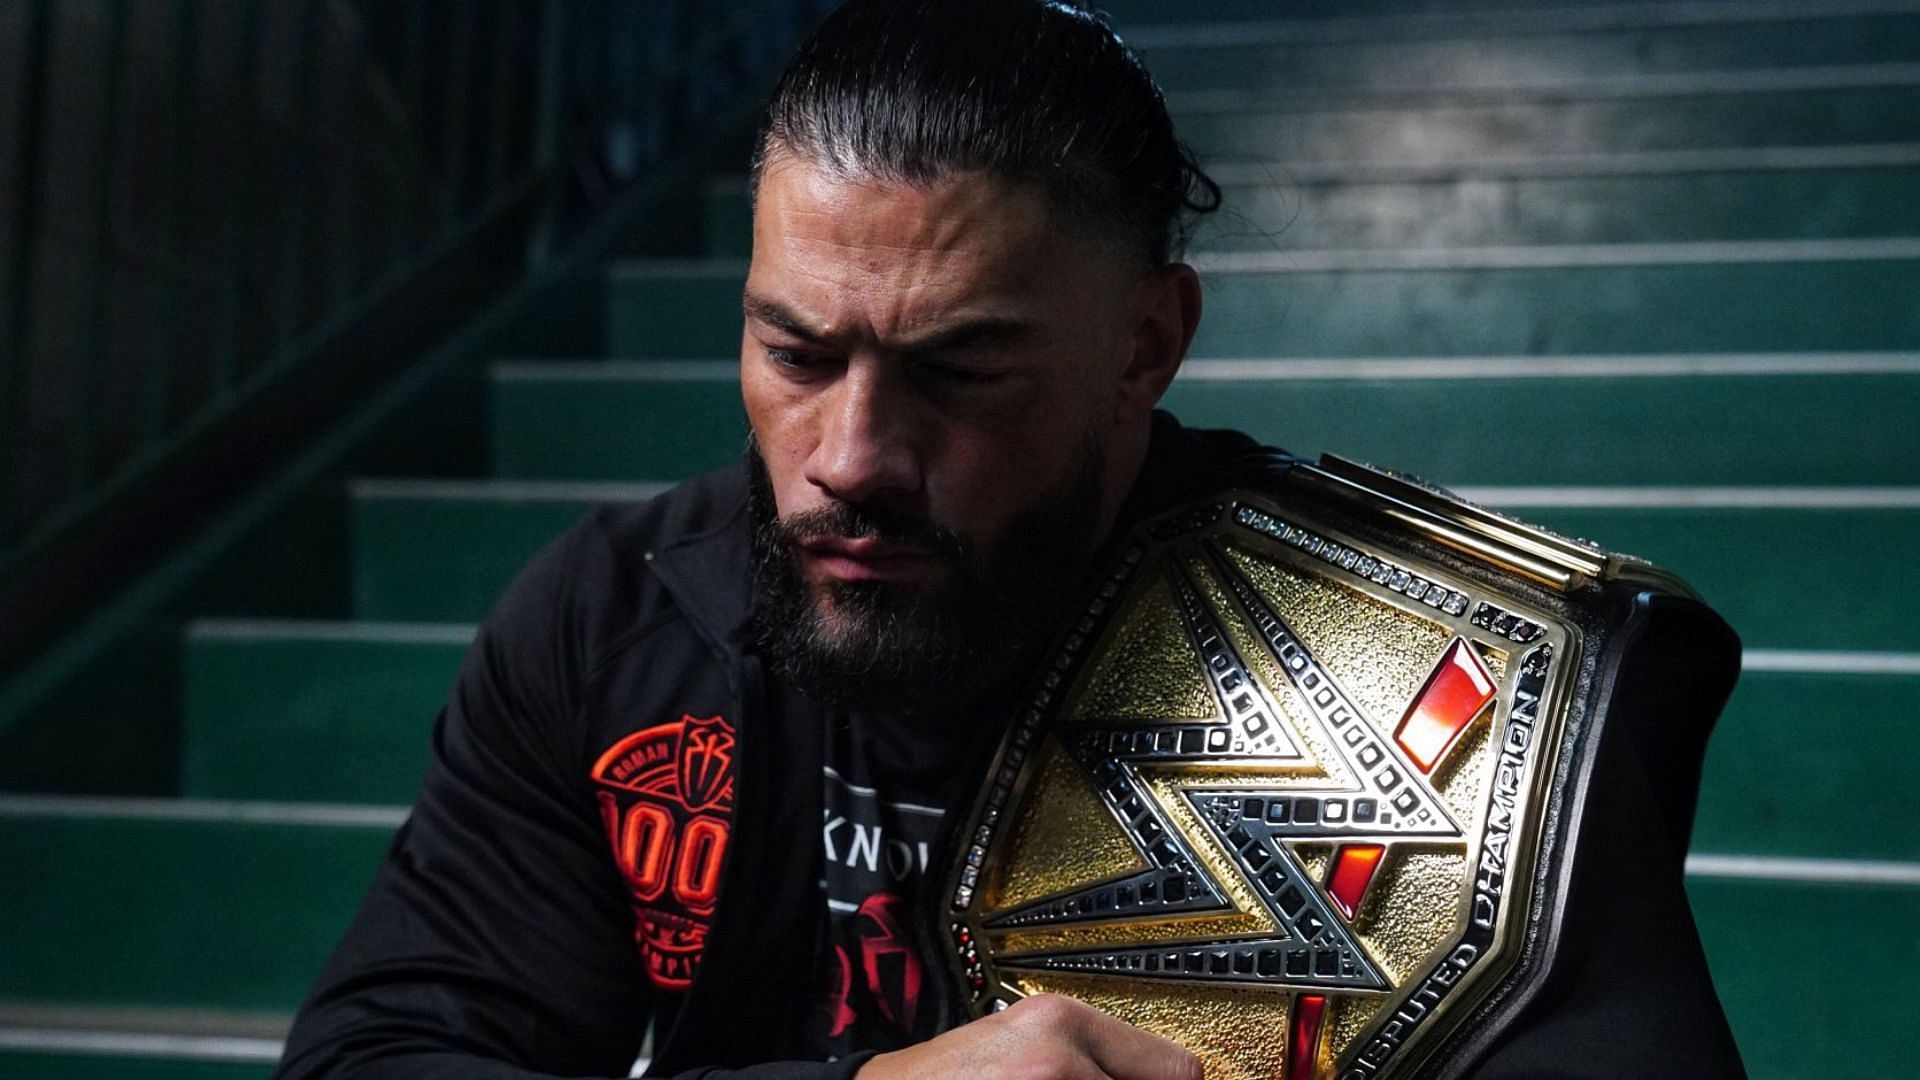 How long will Roman Reigns stay at the top?